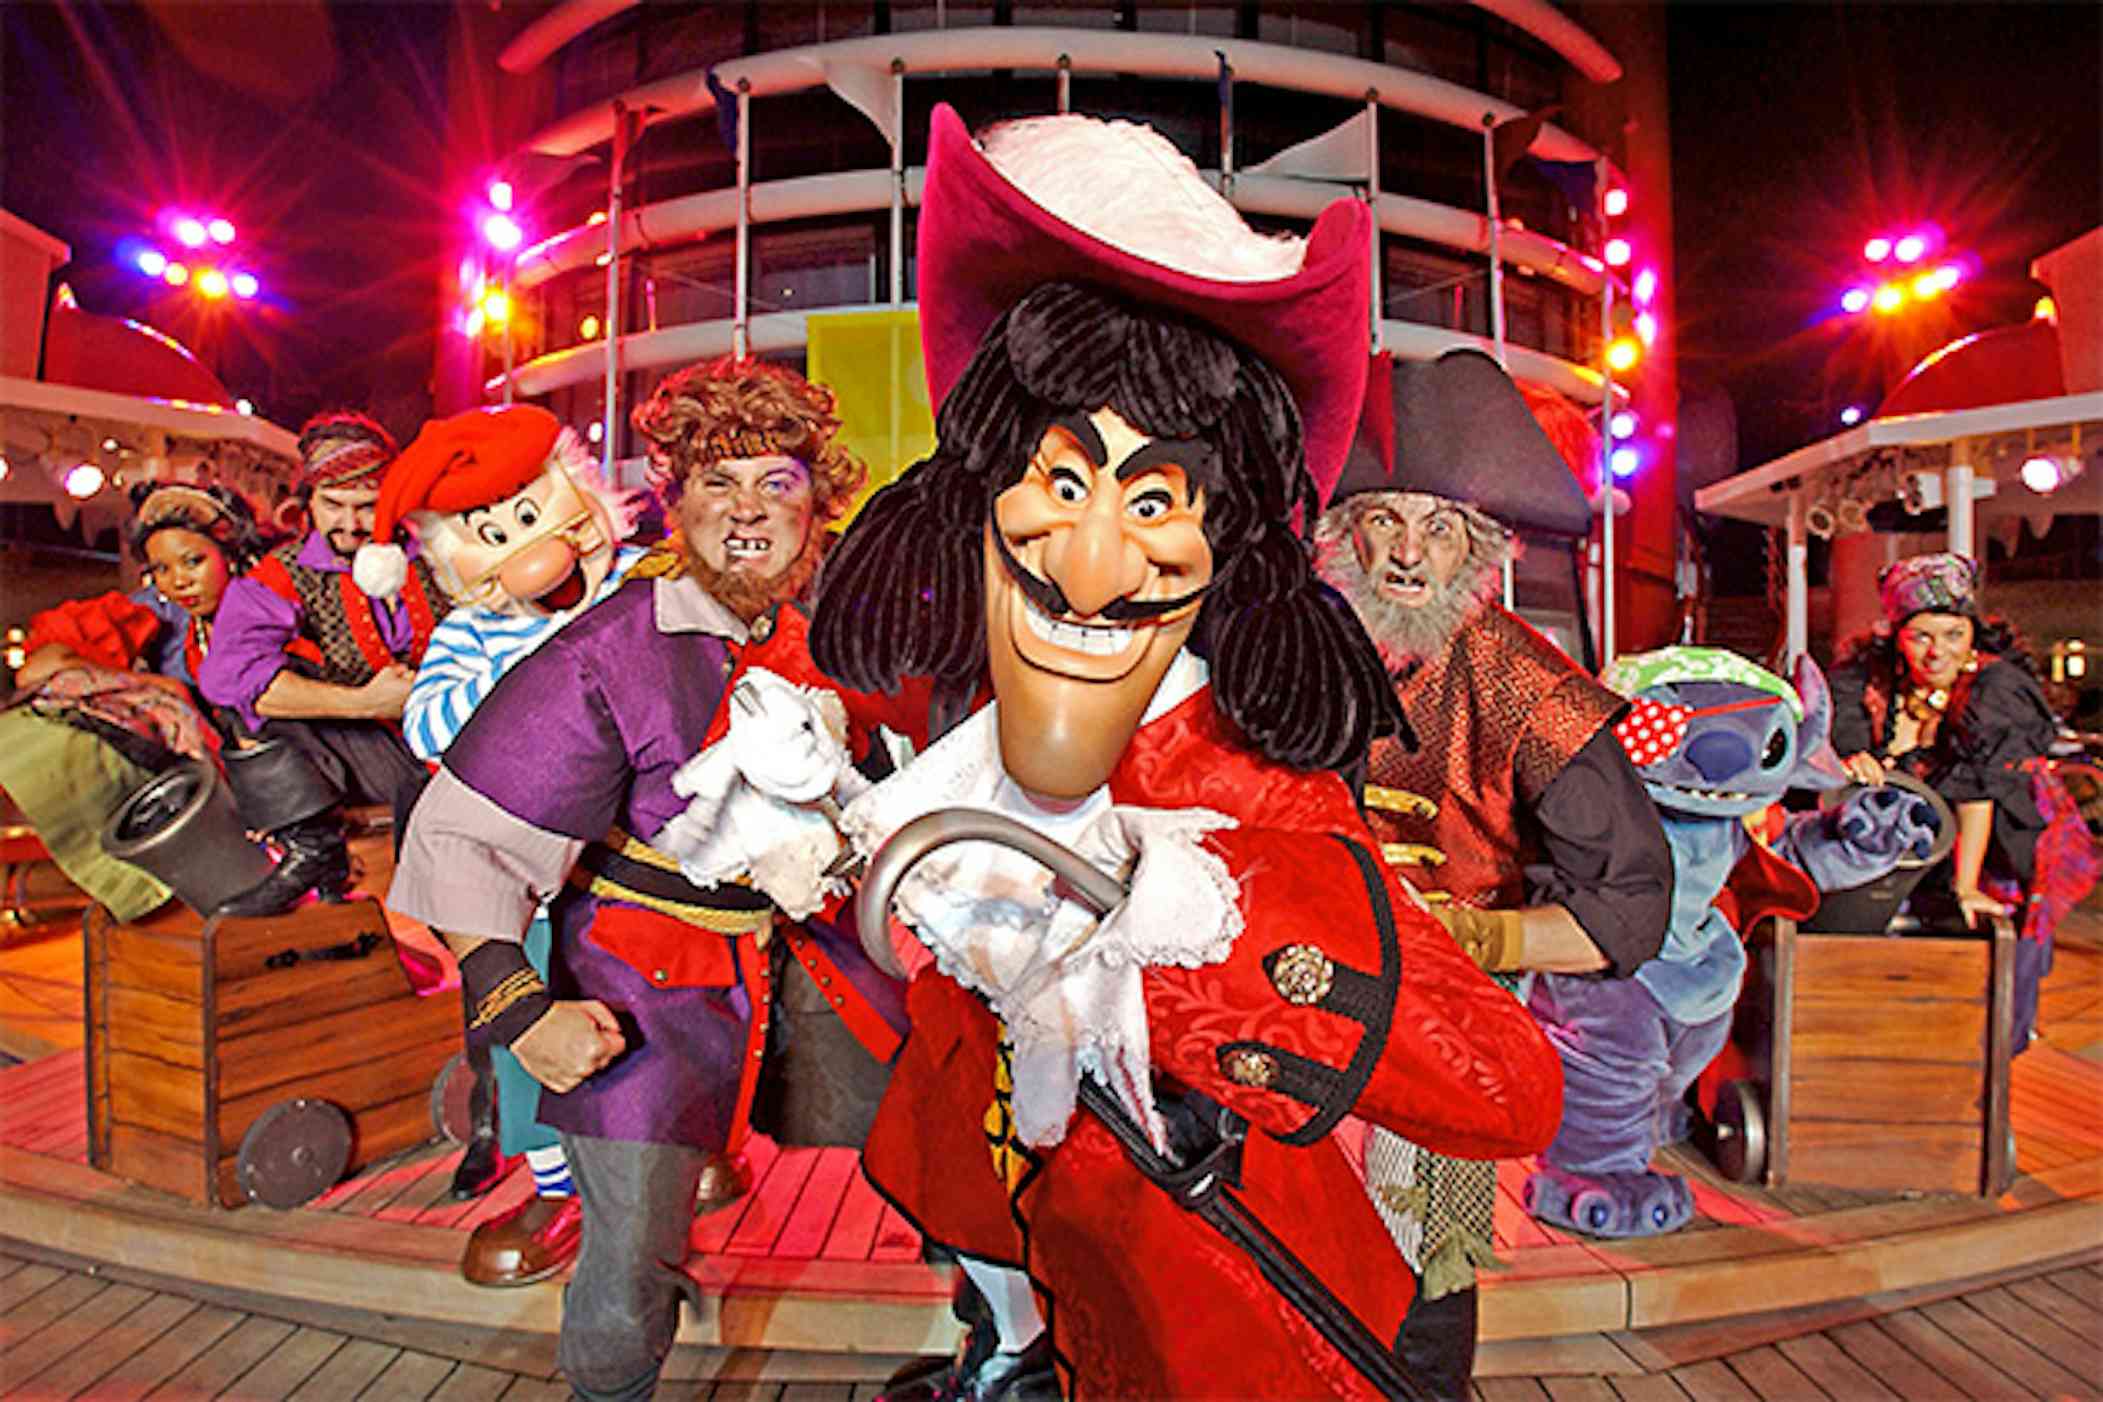 Disney Cruise Pirate Night Guide: What to Know Before You Go